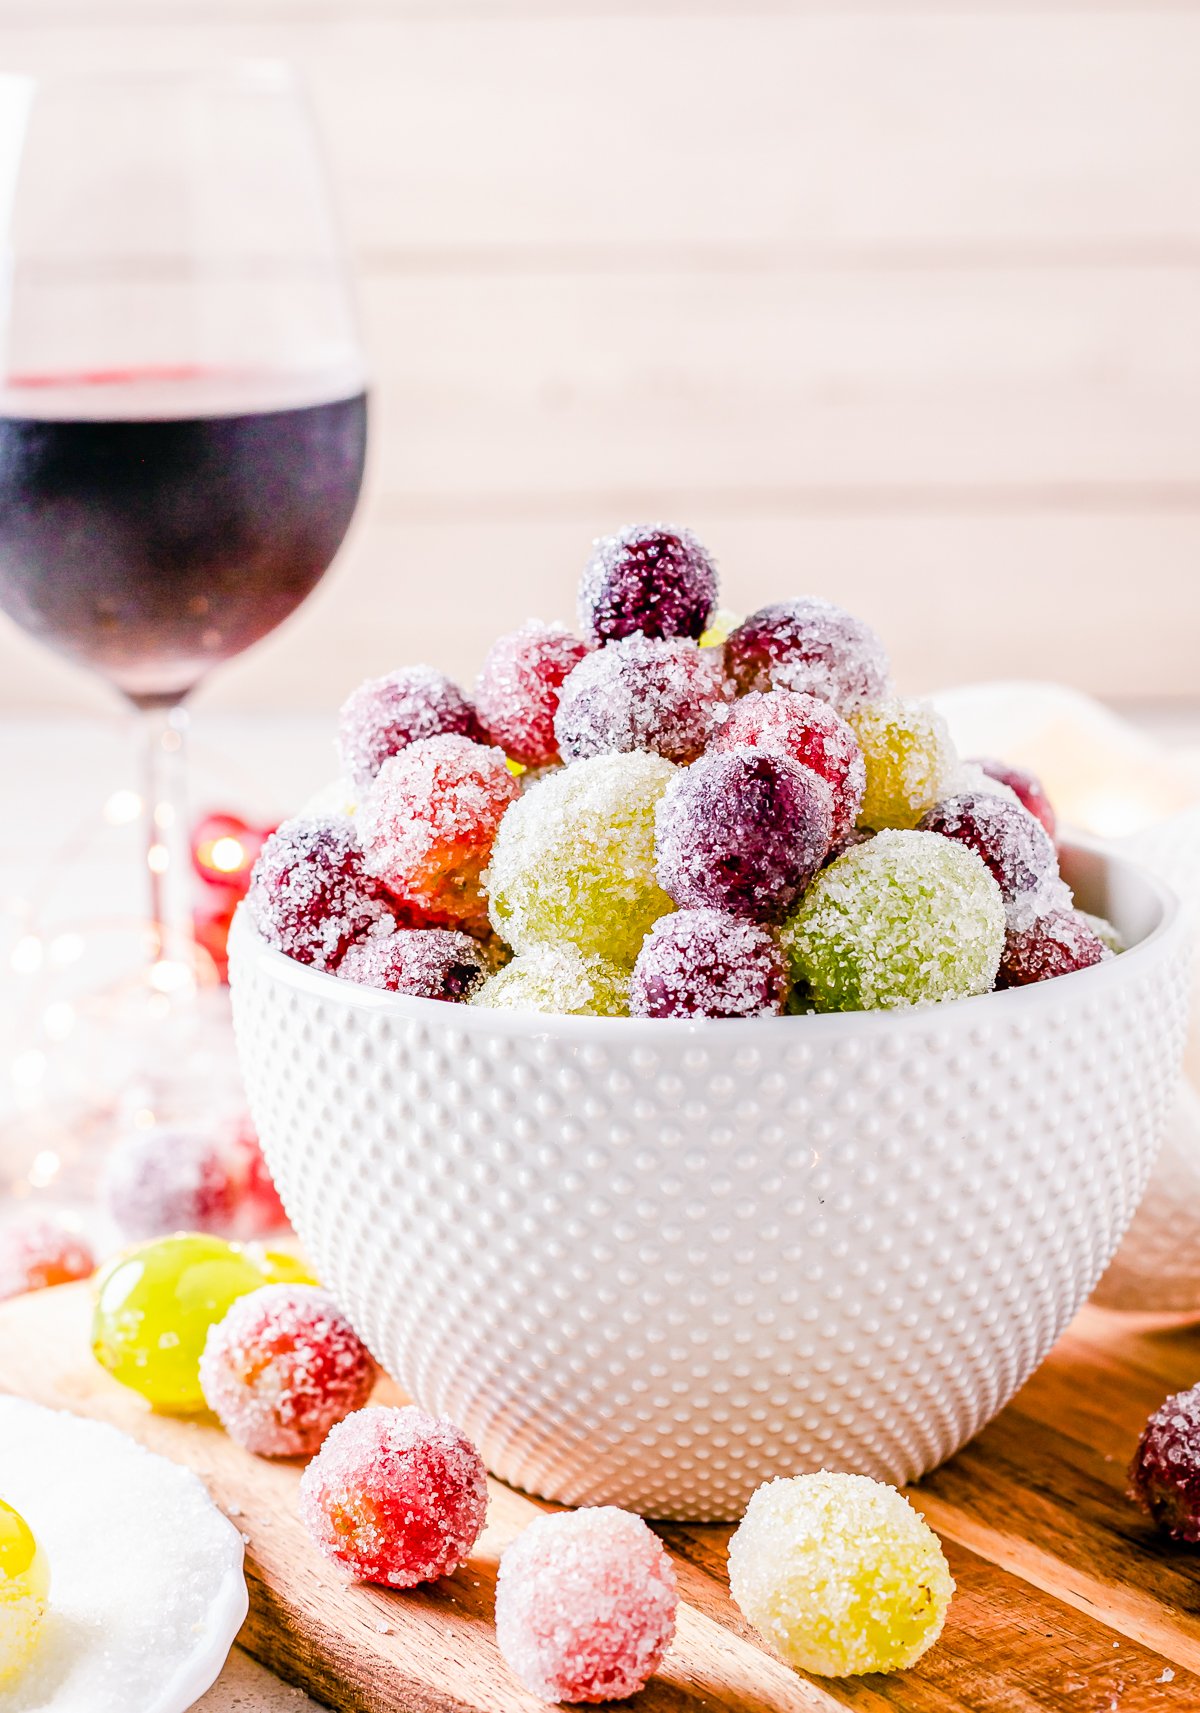 Side view of Candied Grapes with wine in background.